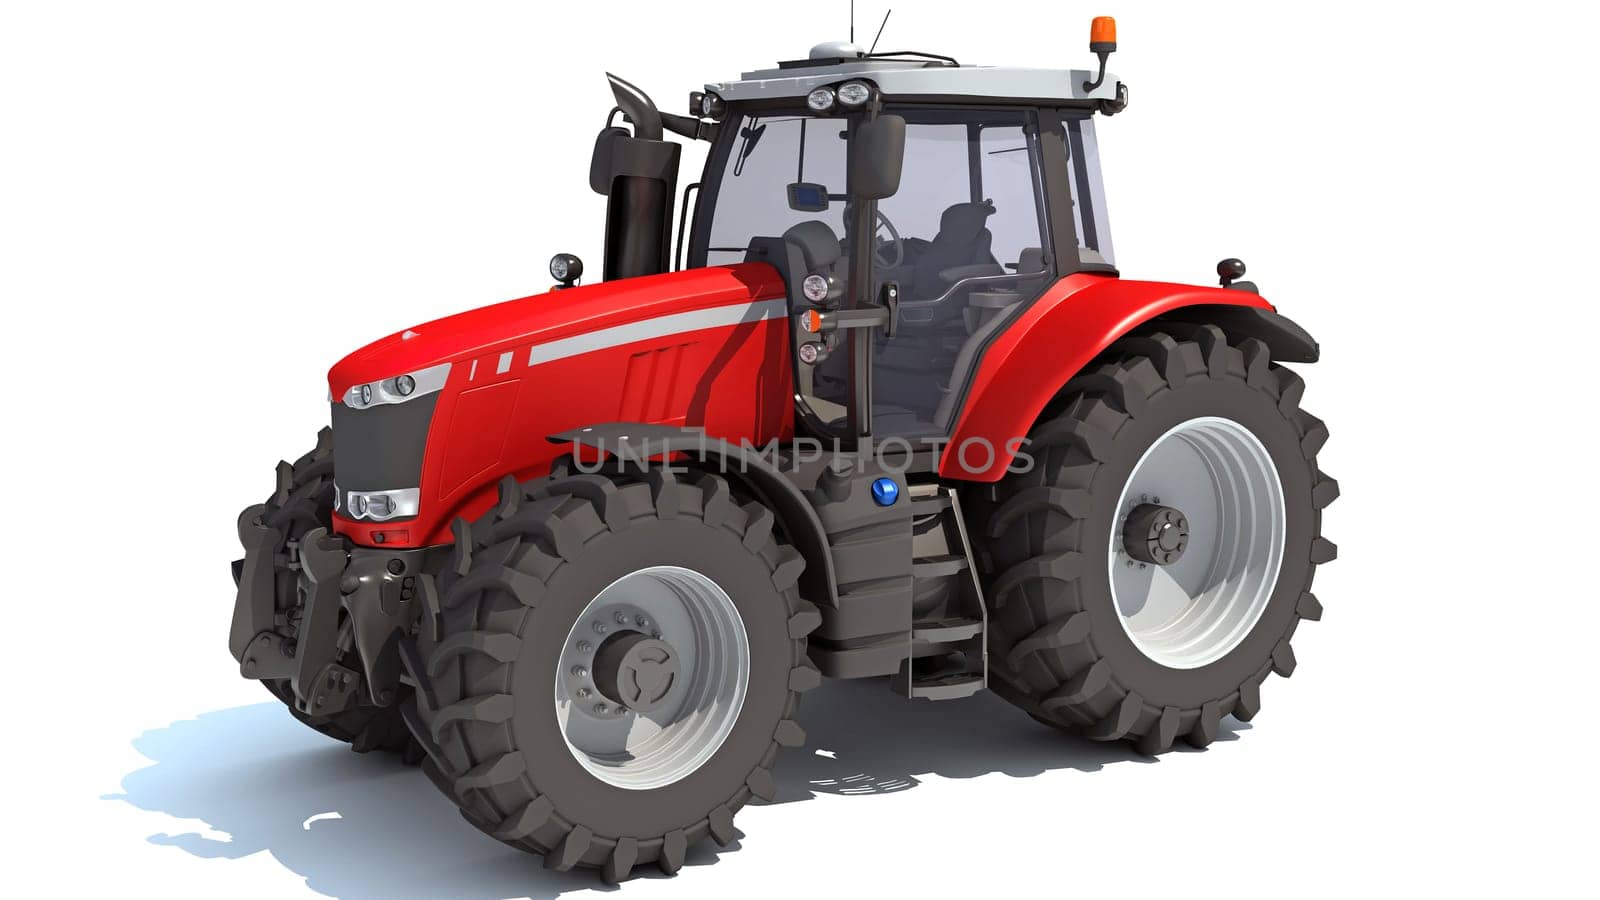 3D rendering of Farm Tractor on white background